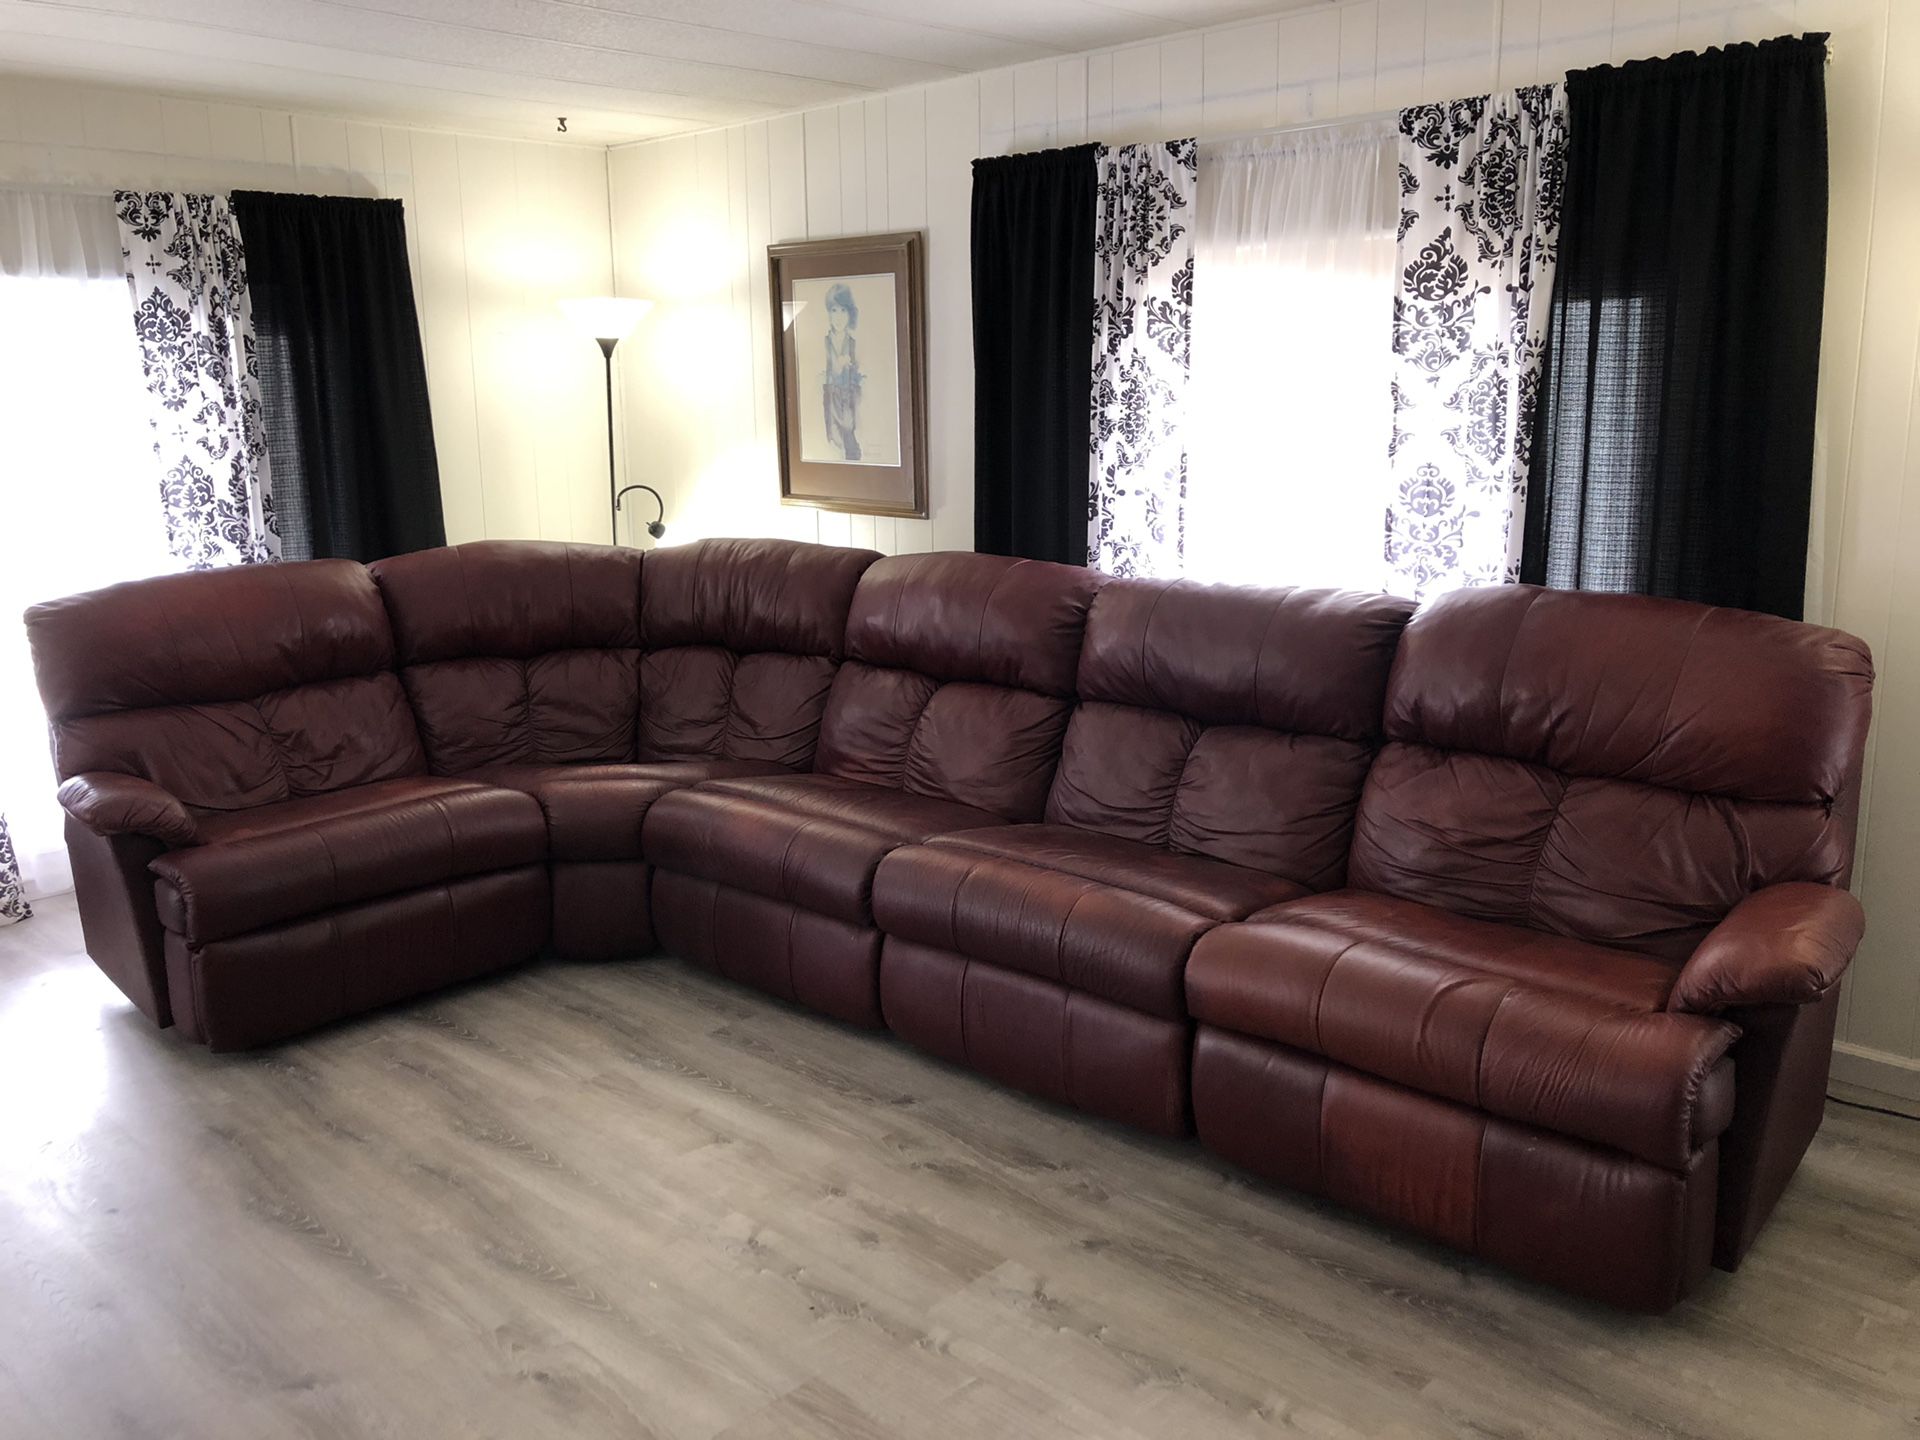 Leather couch (red/brown)